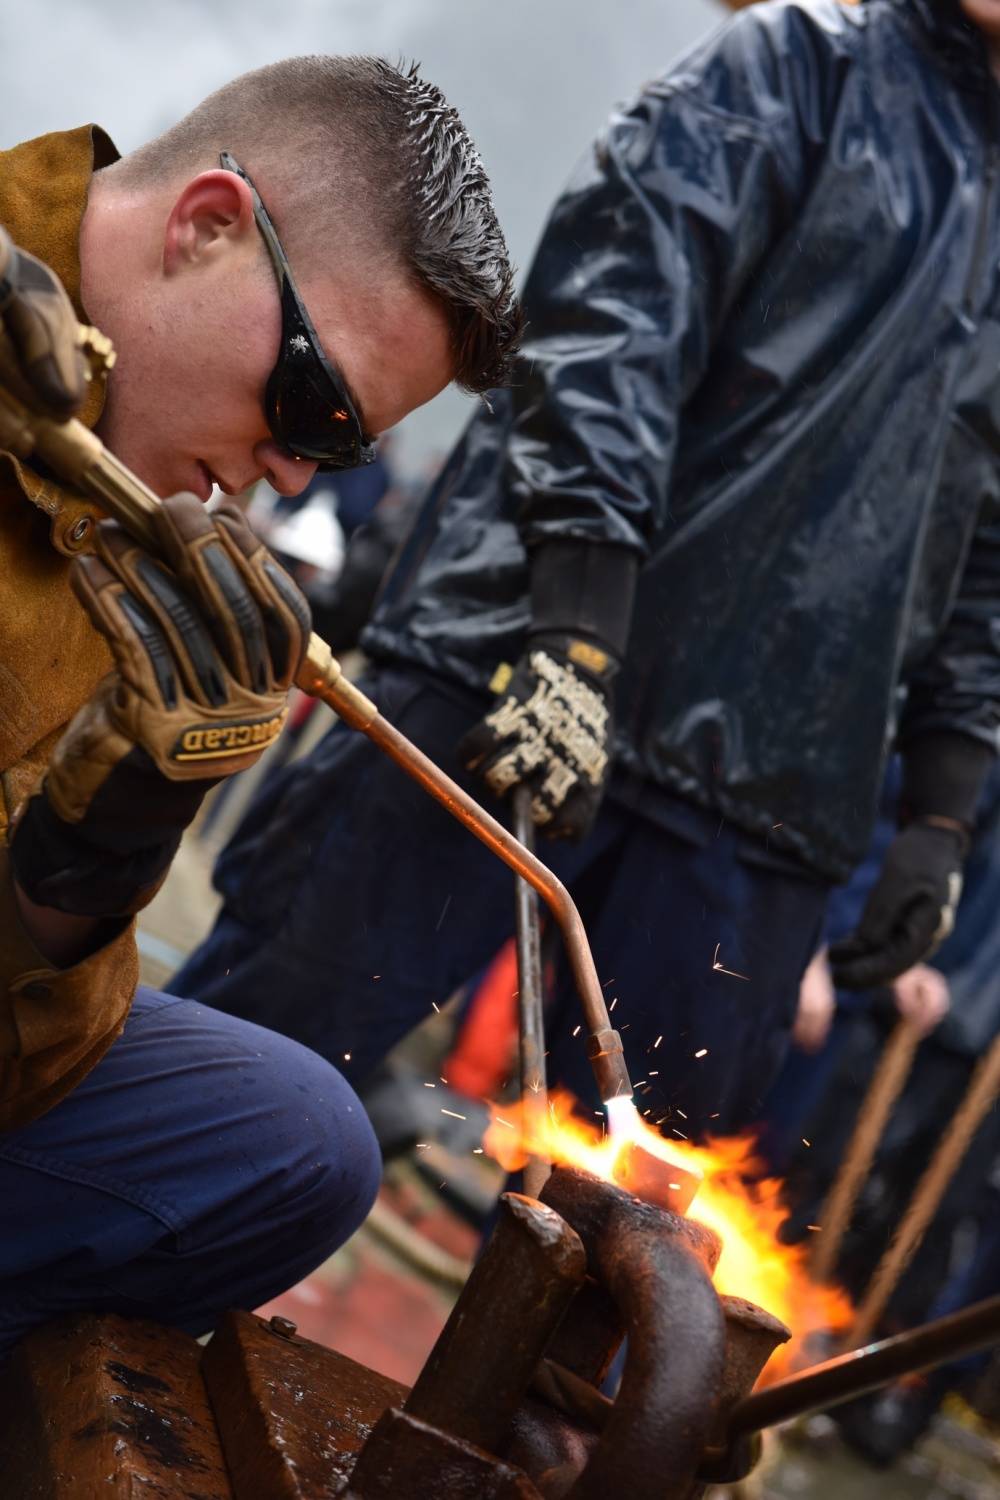 A Coast Guard Cutter Sycamore crewmember heats a rivet pin during the heat-and-beat competition, where teams use torches and hammers to seal shackles for time, during the Buoy Tender Roundup Olympics at Coast Guard Station Juneau on Wednesday, Aug. 16, 2017. This year’s roundup included eight U.S. Coast Guard and Canadian buoy tenders, stationed throughout Alaska and the Pacific Northwest. (Petty Officer 1st Class Jon-Paul Rios | U.S. Coast Guard)